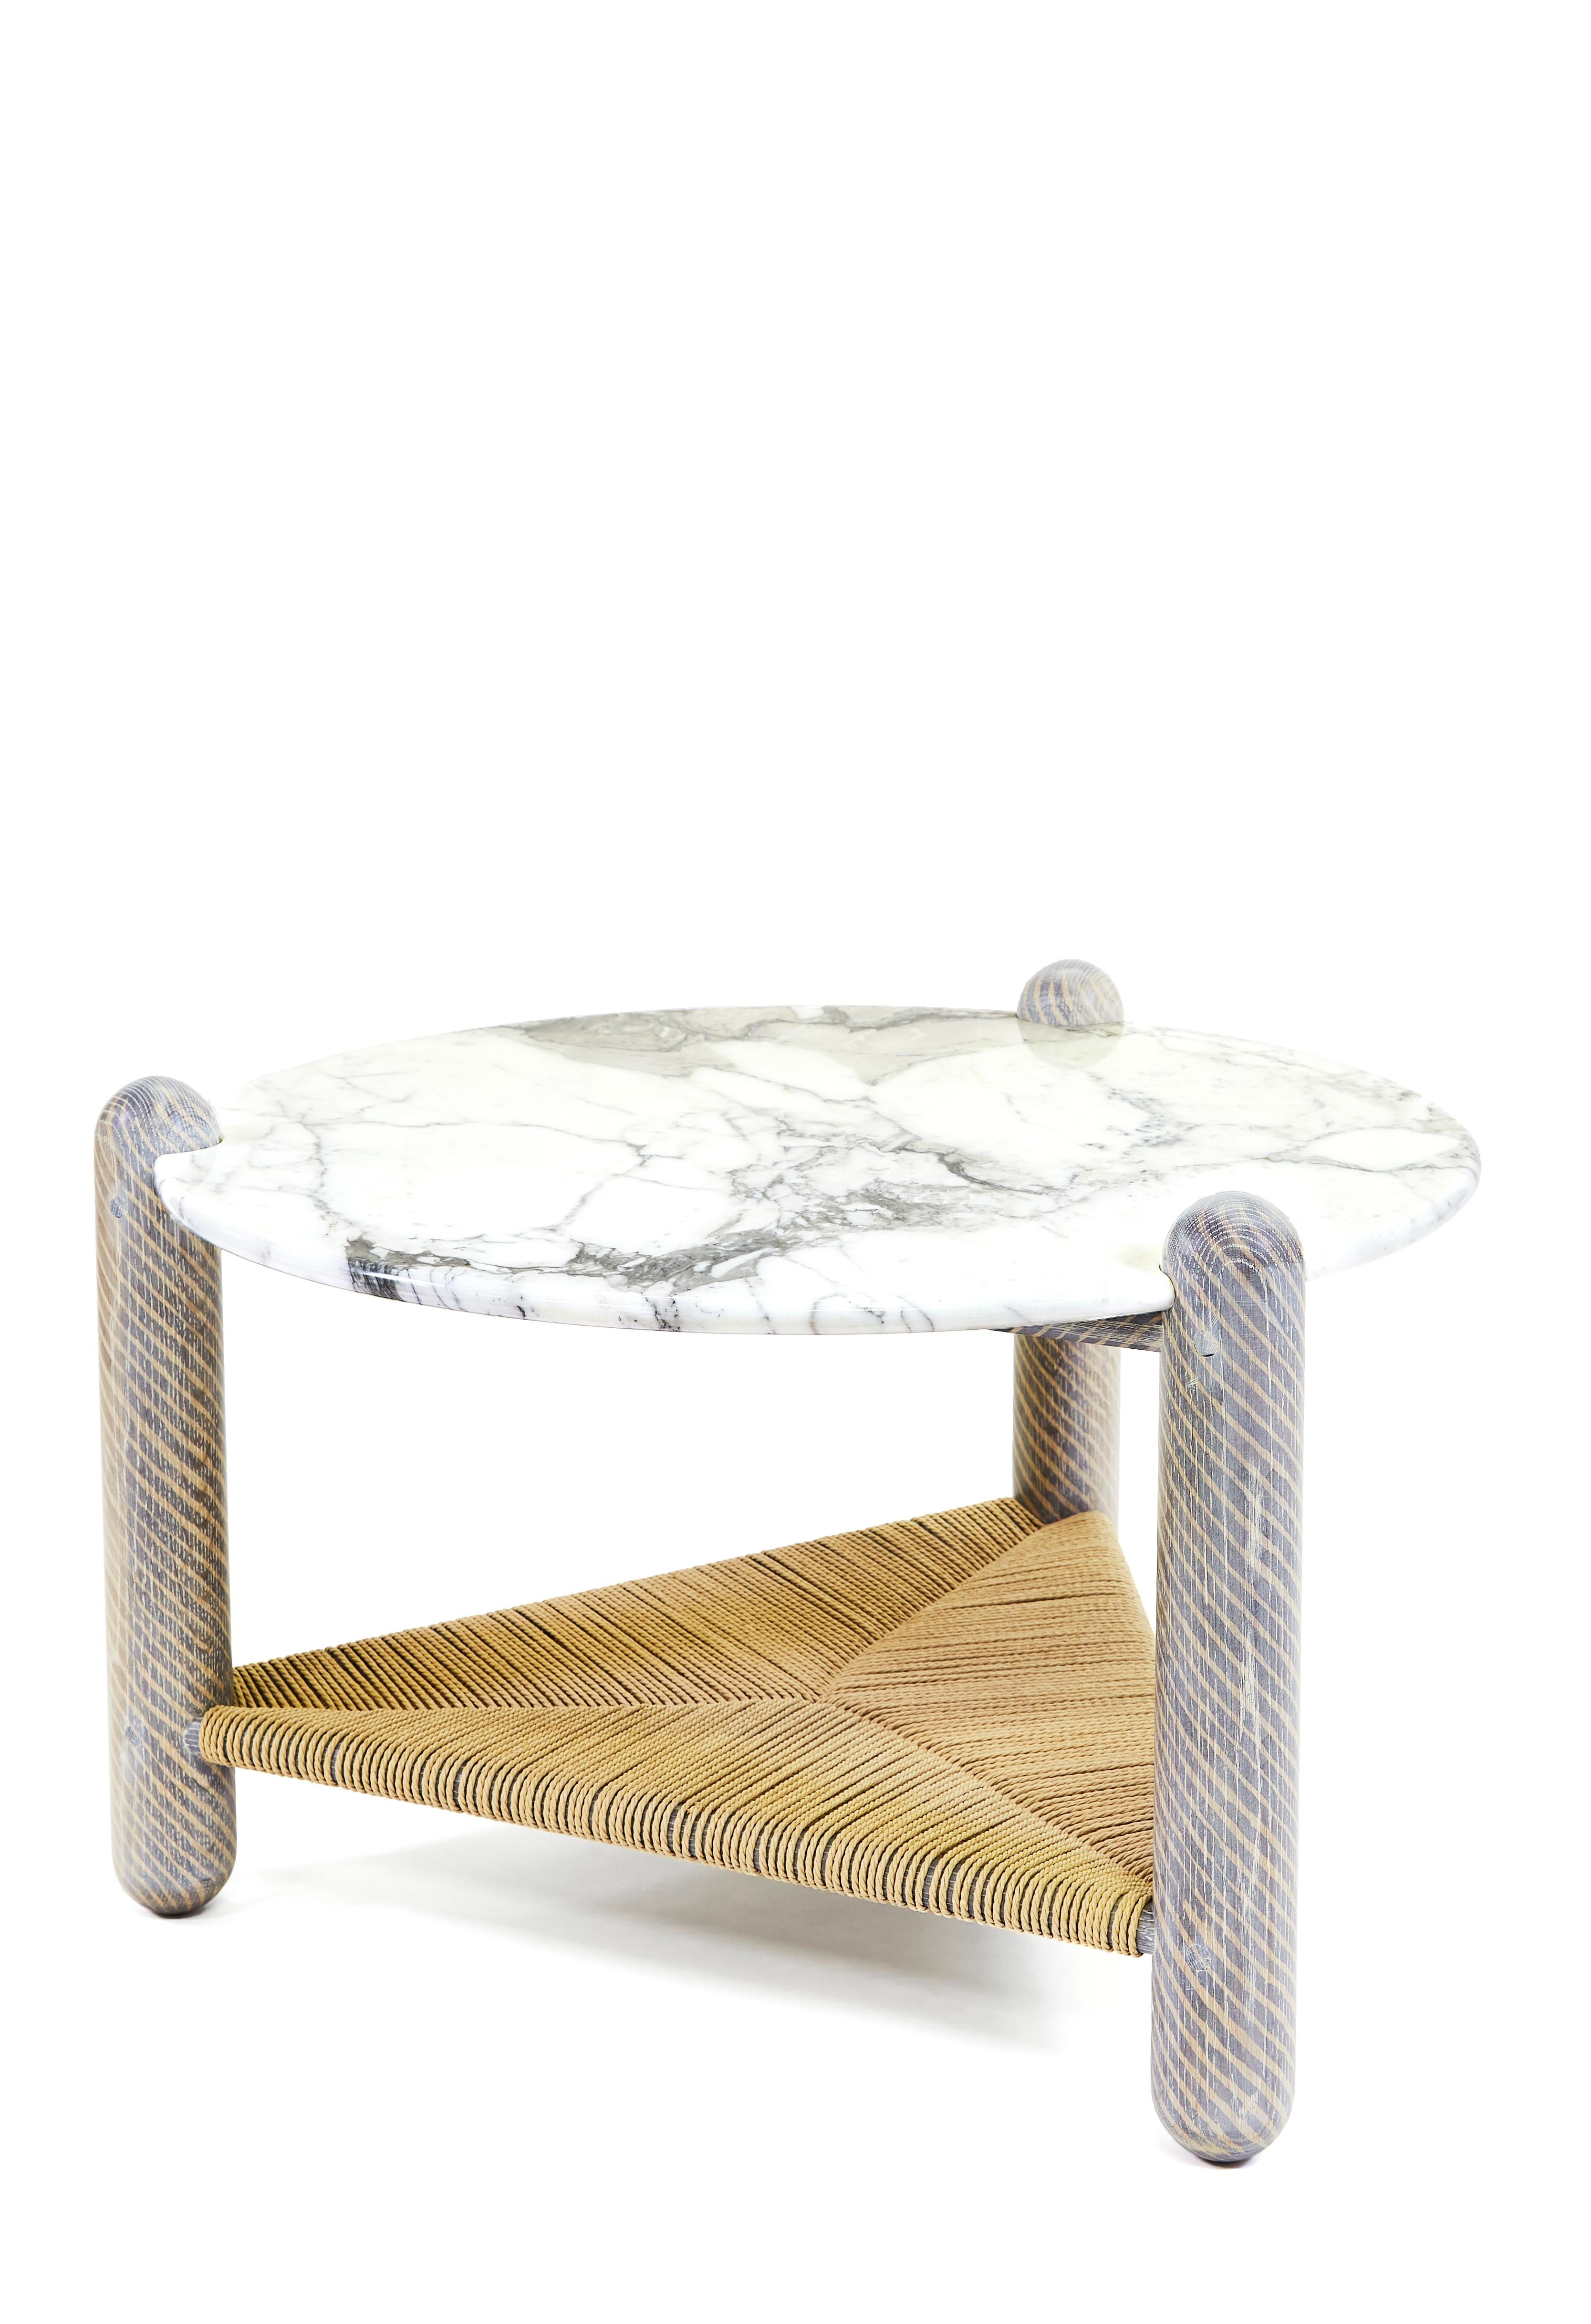 Captain's coffee table by Hamilton Holmes.
Oxalino Collection 
Dimensions: 30”D x 18”H
Materials: White oak, calcatta marble, natural Danish cord and oxidized treatment.

These solid oak three-legged tables feature handwoven Danish cord lower